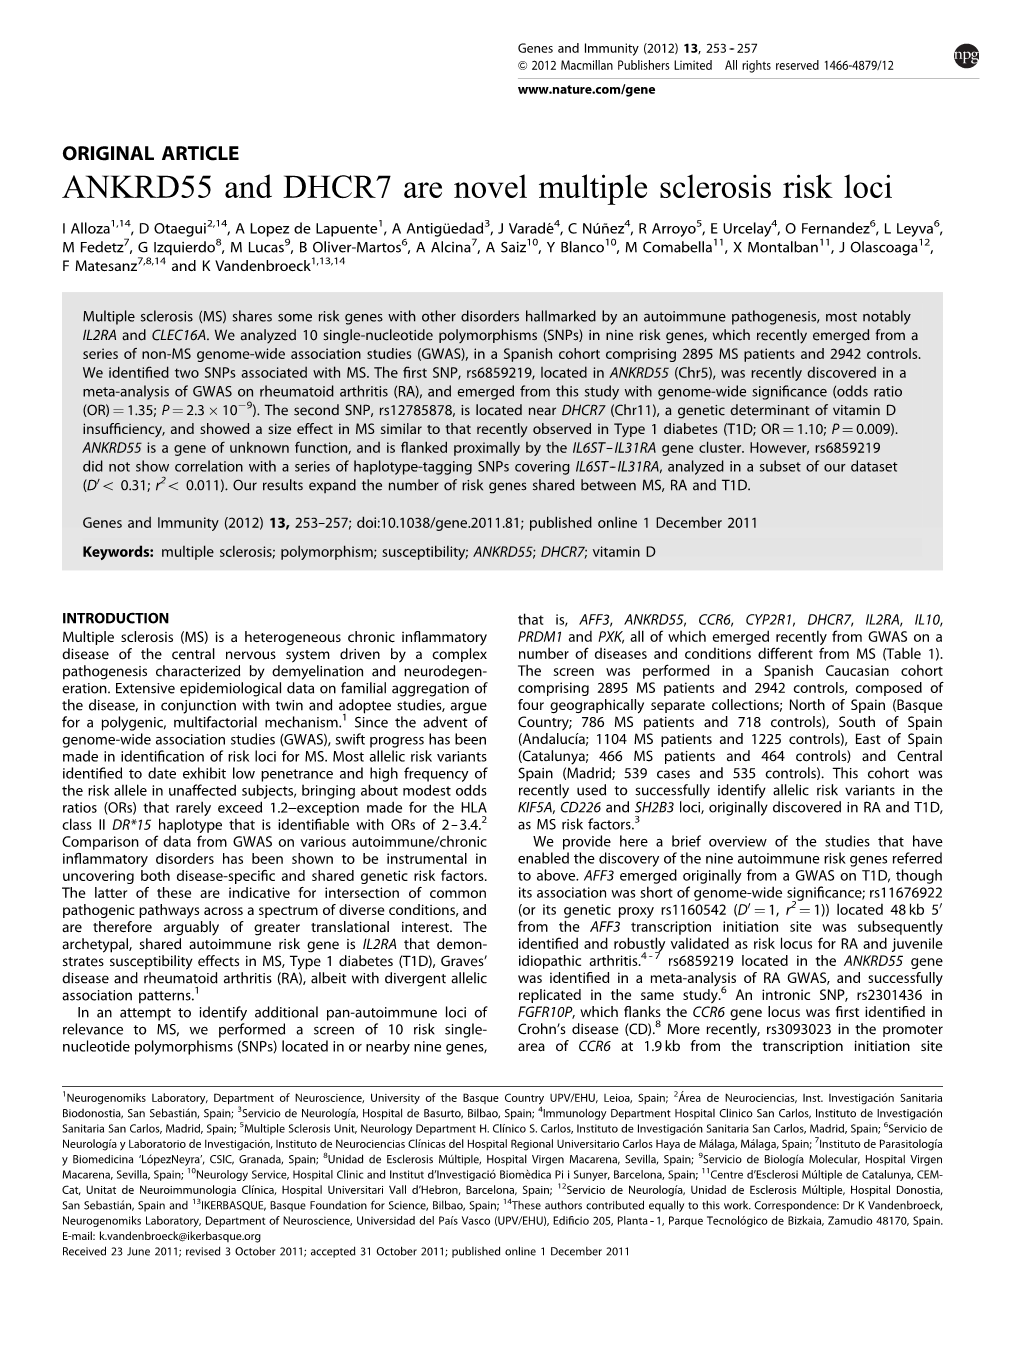 ANKRD55 and DHCR7 Are Novel Multiple Sclerosis Risk Loci